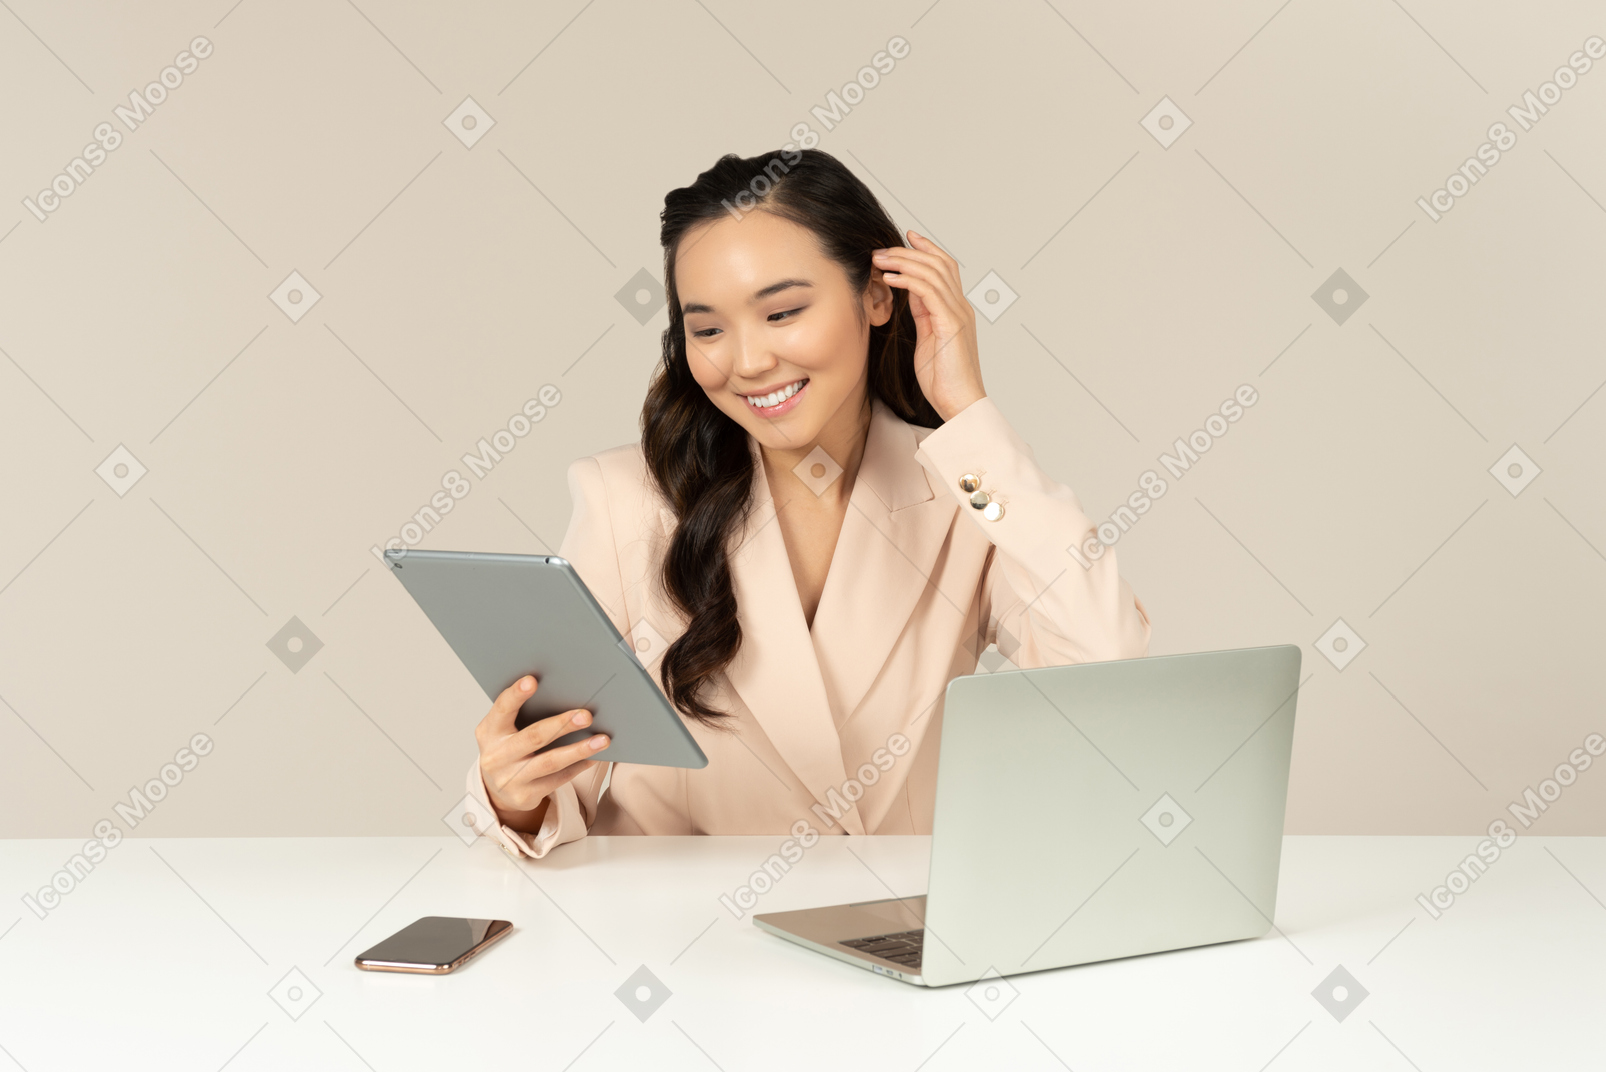 Asian office employee fixing hair and looking on tablet